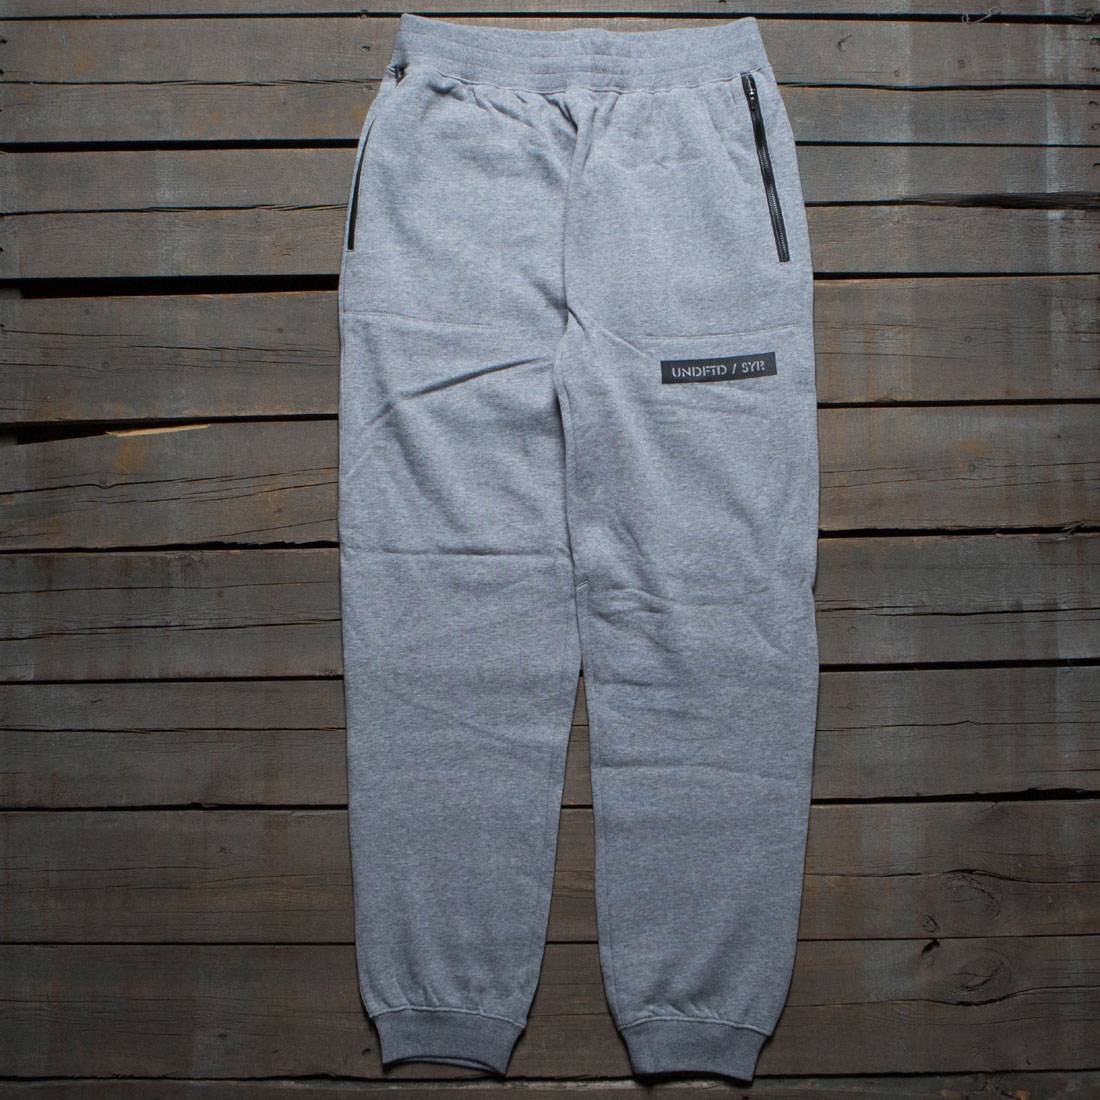 Undefeated x SYR Men SYR Technical Sweatpants (gray / heather)